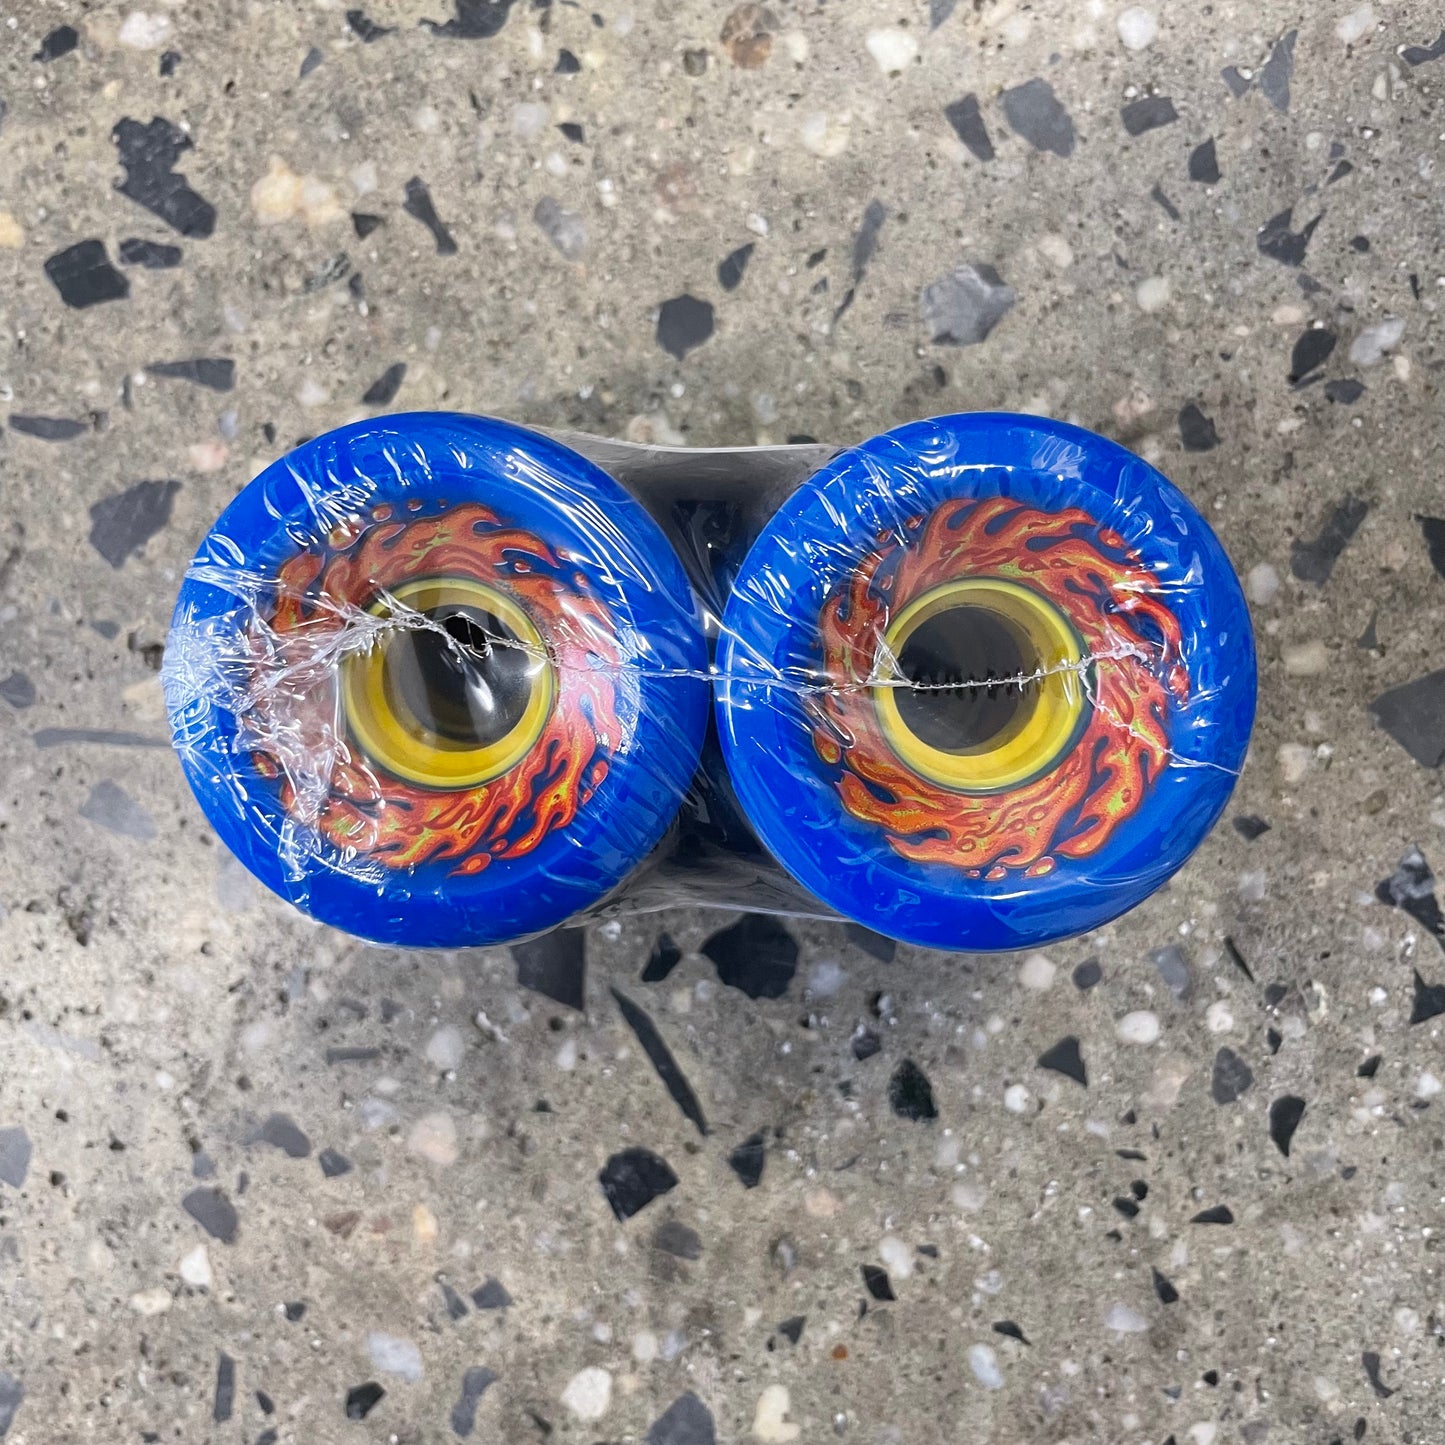 blue wheels with orange and yellow design